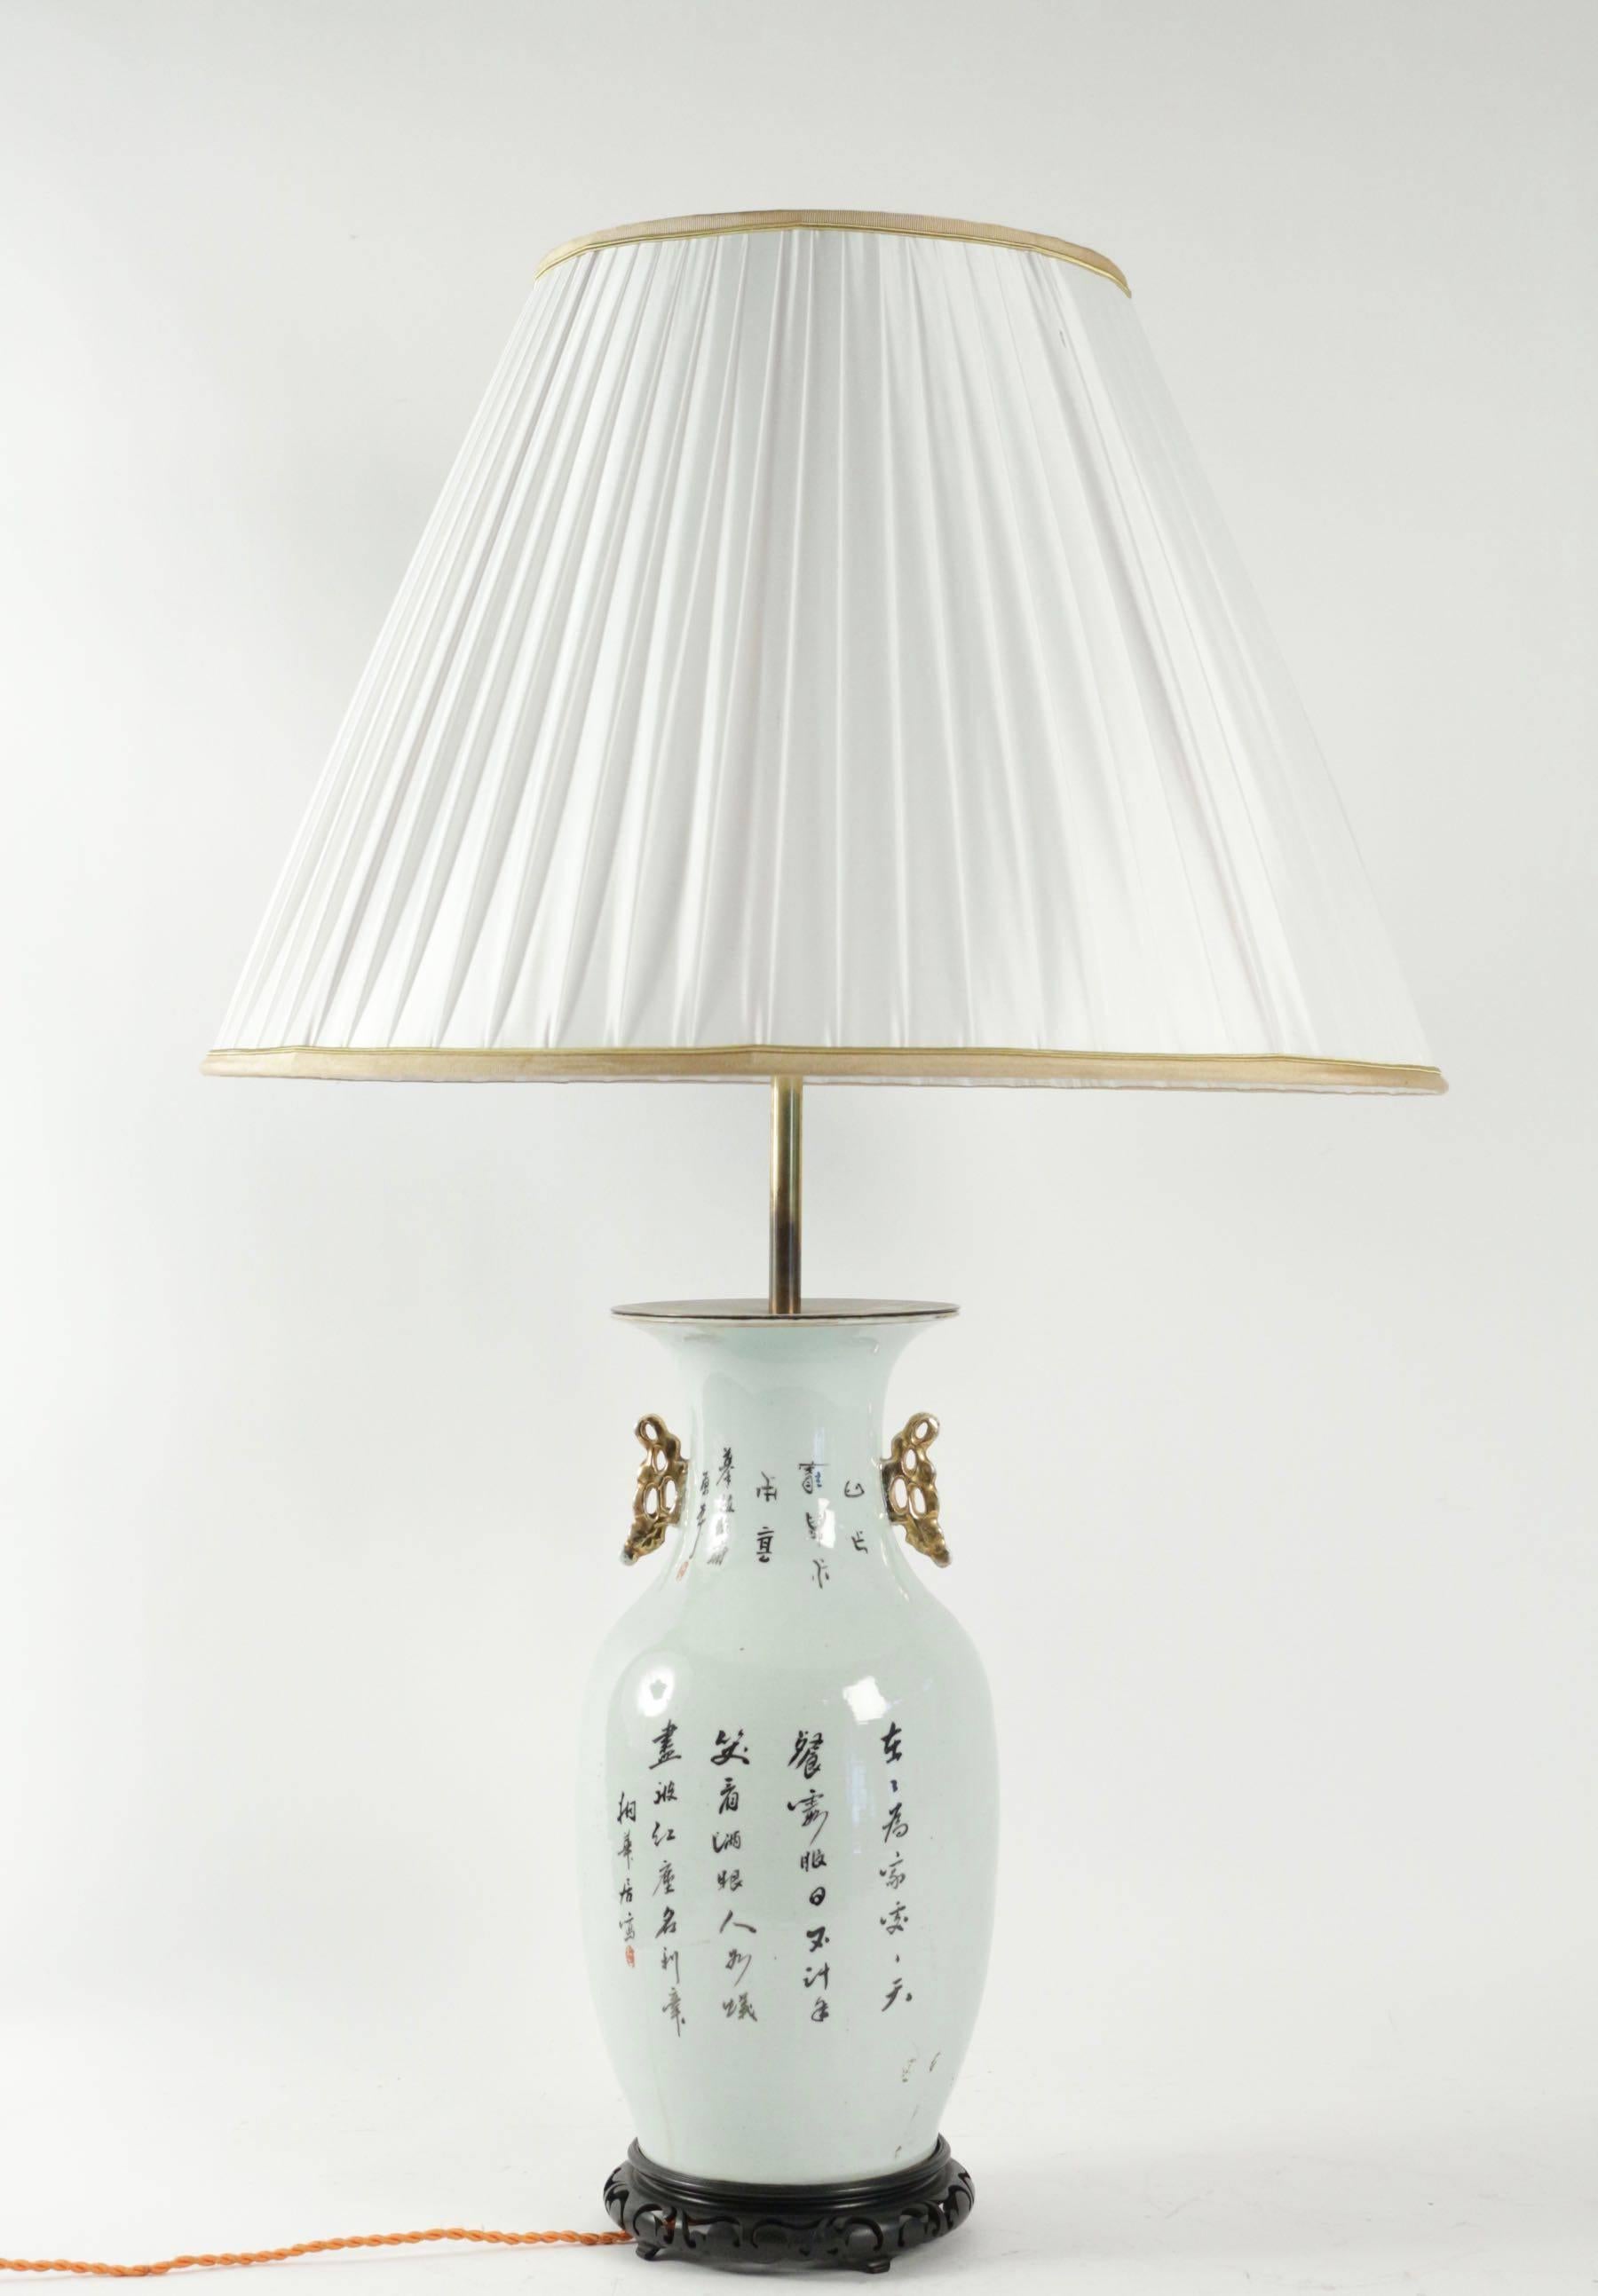 Porcelain Chinese Lamp from the 20th Century